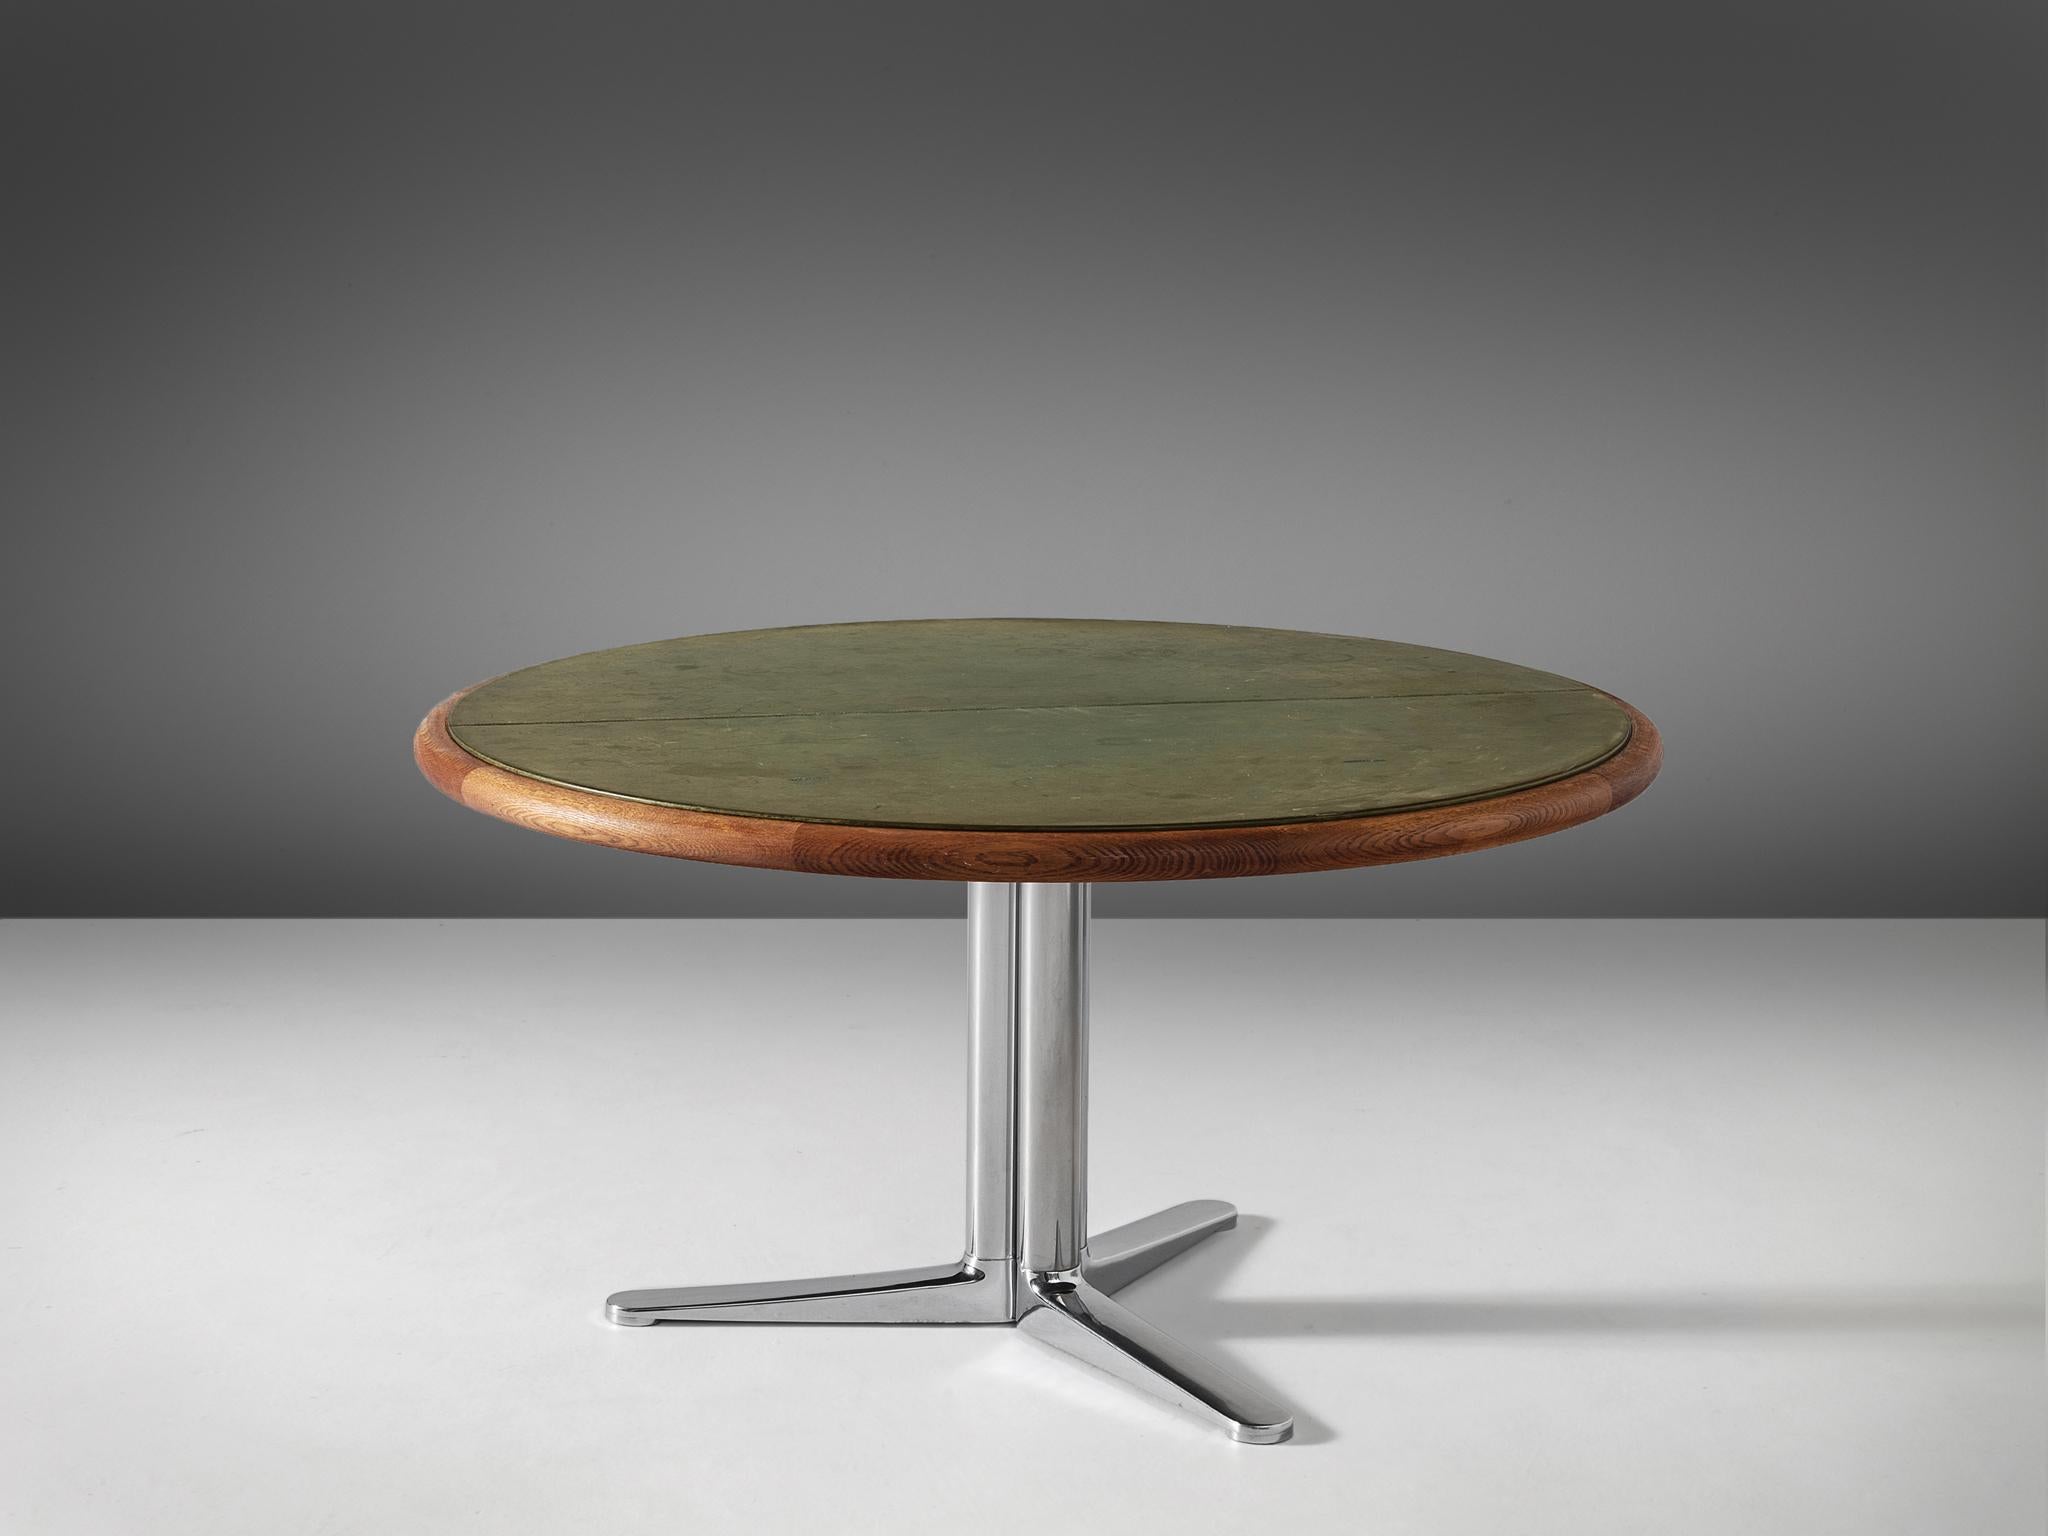 Warren Platner for Knoll International, dining table, in oak, leather and steel, United States, 1960s.

Round dining table by Warren Platner. This table has a top of green leather. The leather shows a beautiful patina, yet there are some traces of